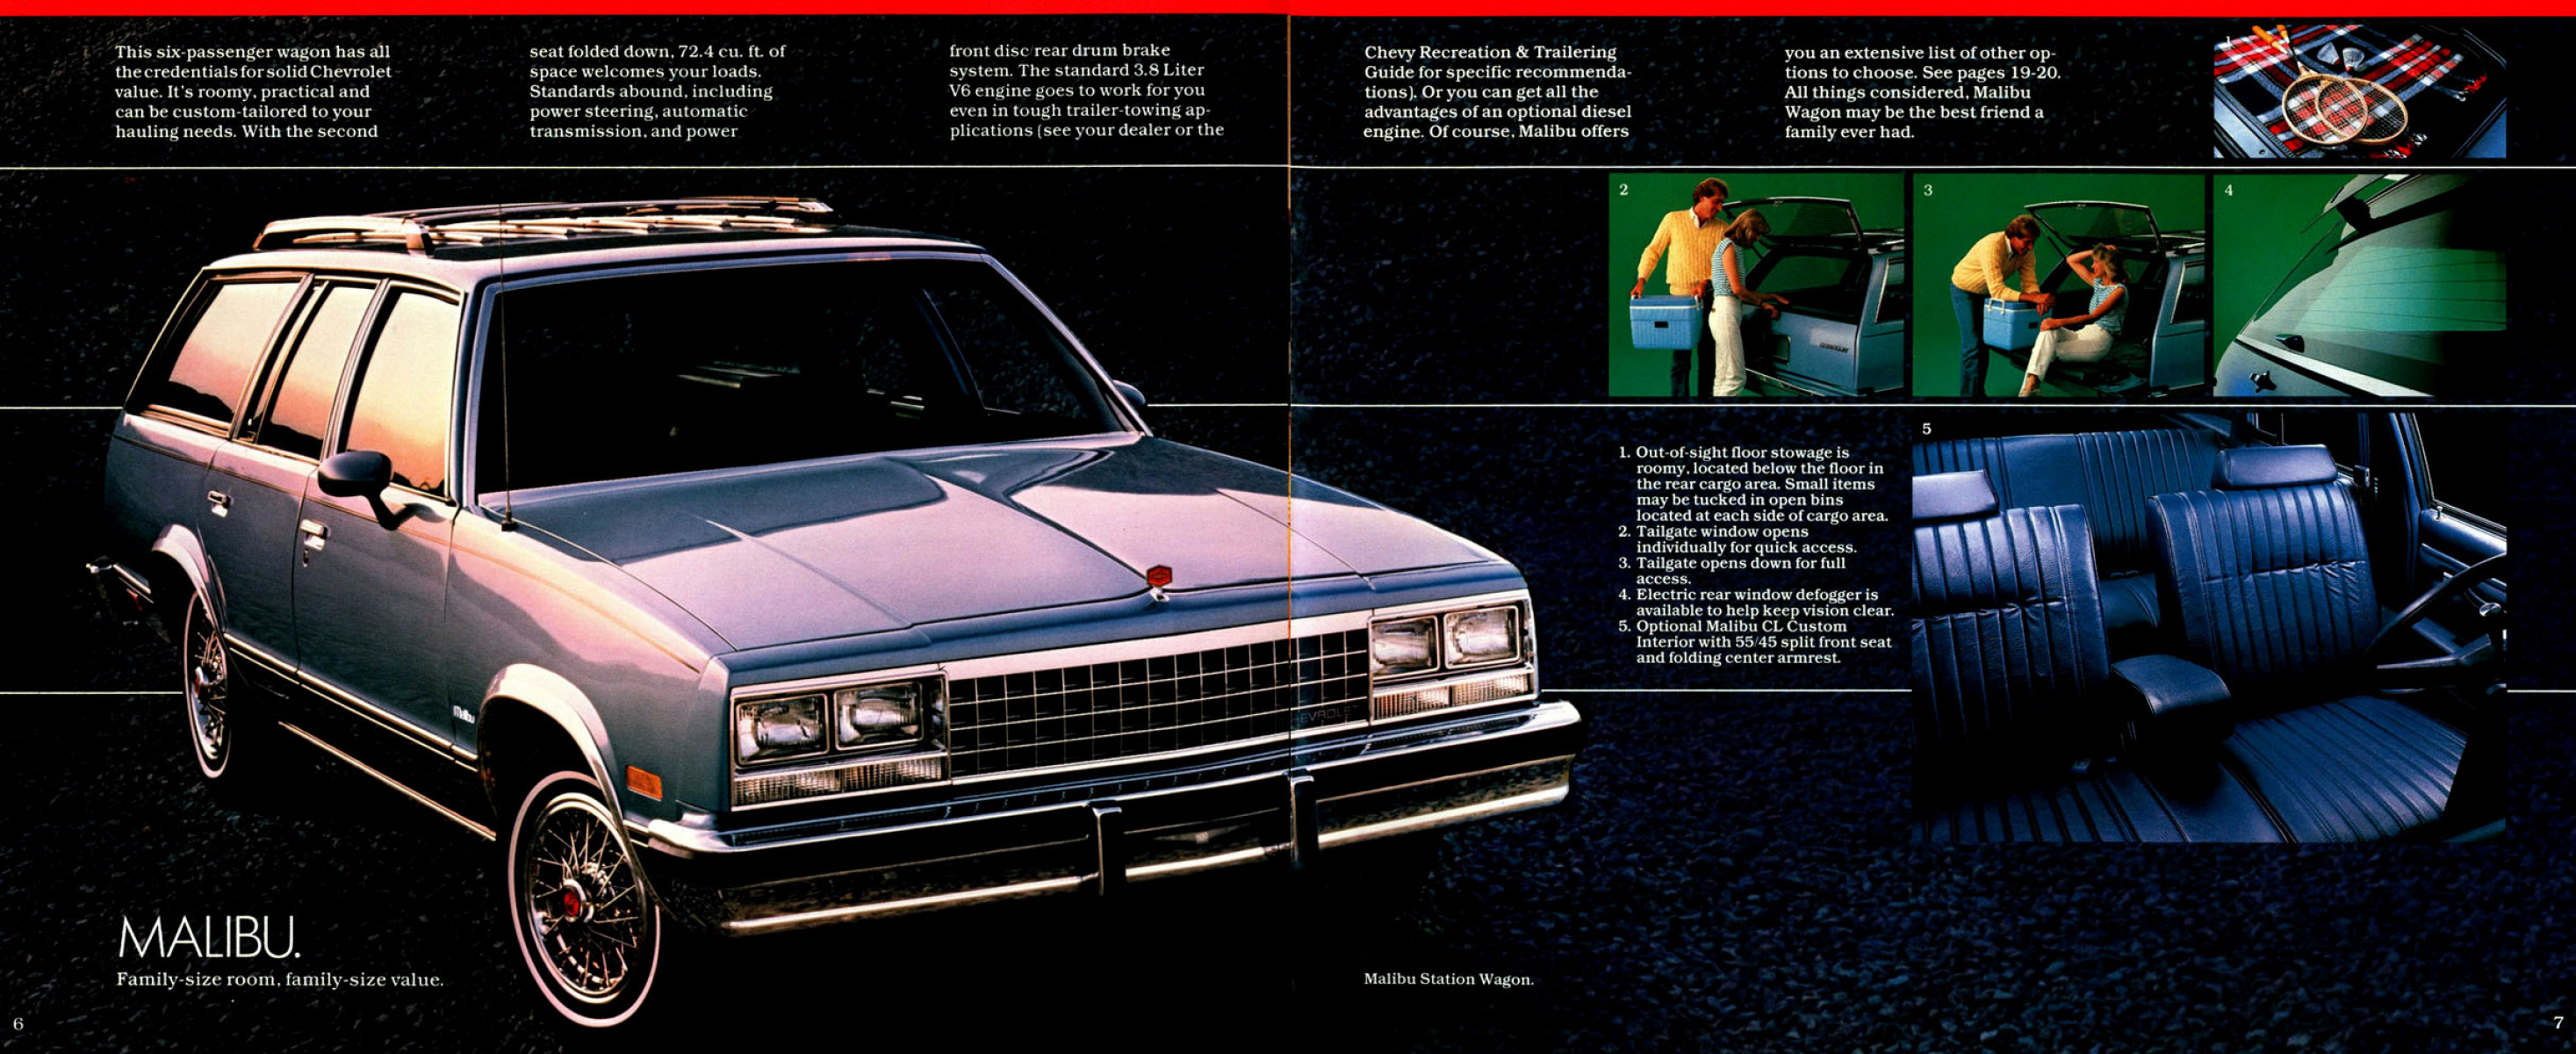 1983_Chevrolet_People-Carriers-06-07